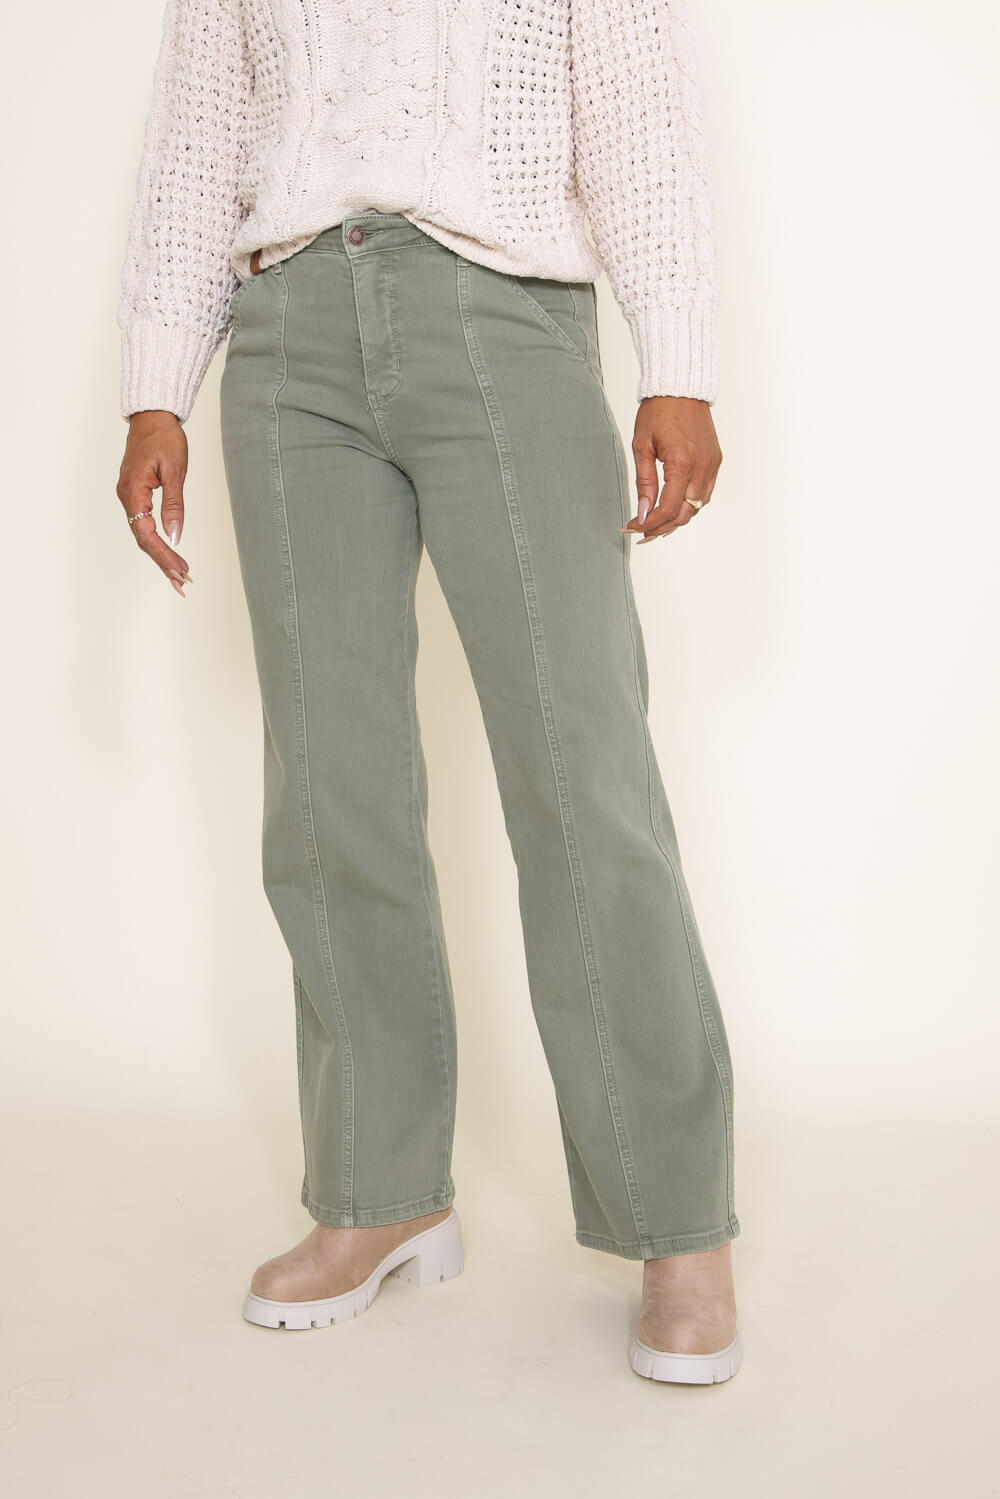 Reformation Rowe Mid-Rise Relaxed Straight Jeans Review: Why They're Worth  It